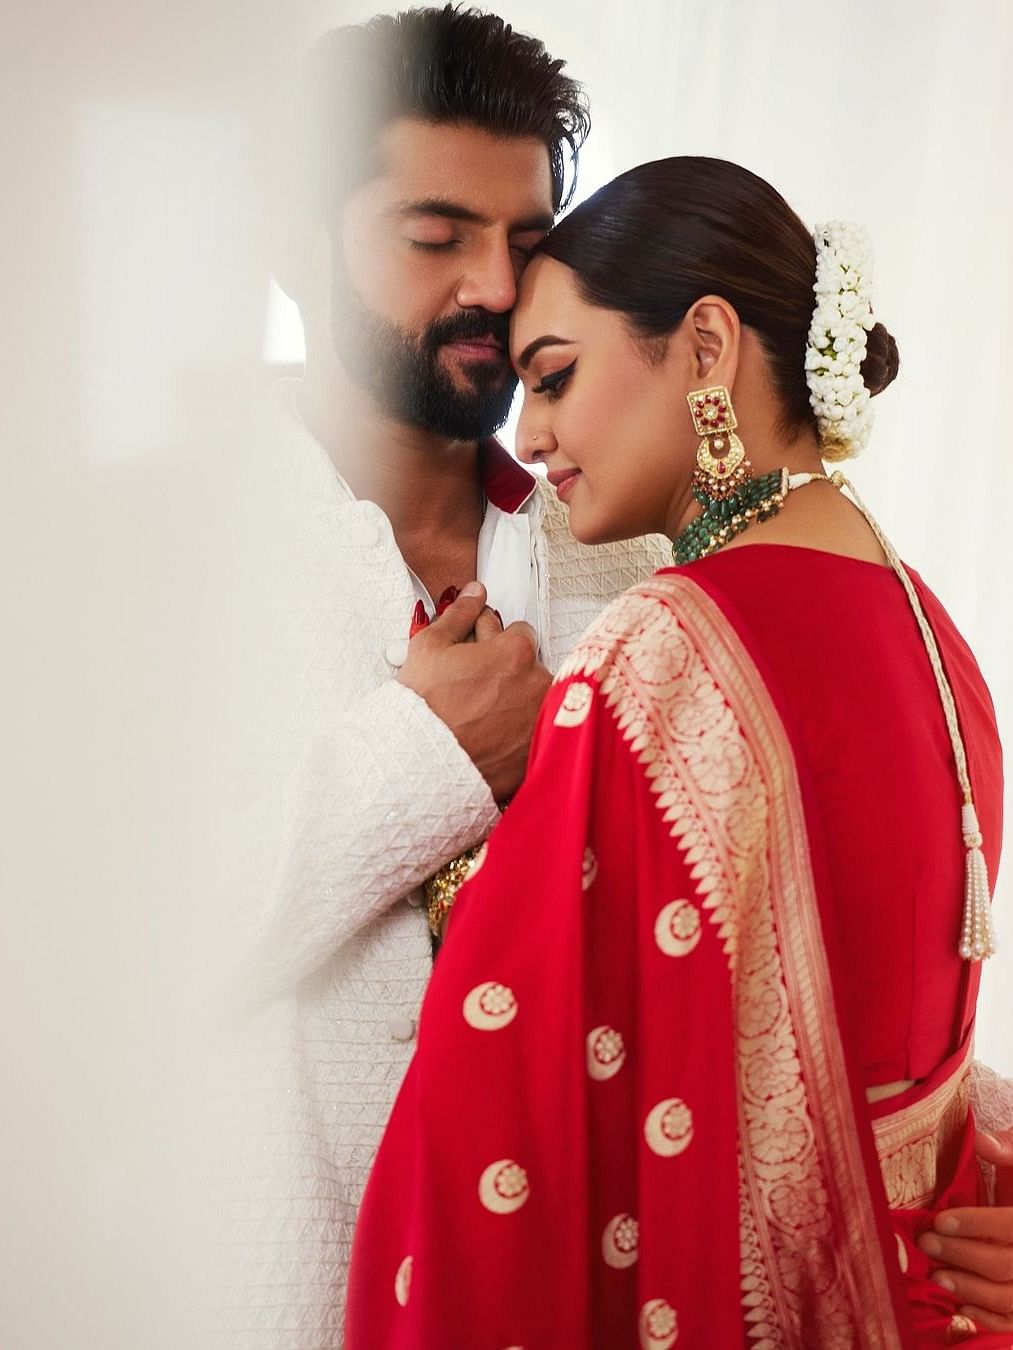 Bollywood actress Sonakshi Sinha delighted her followers on Instagram by sharing some adorable unseen pictures from her wedding, just days after tying the knot with Zaheer Iqbal.